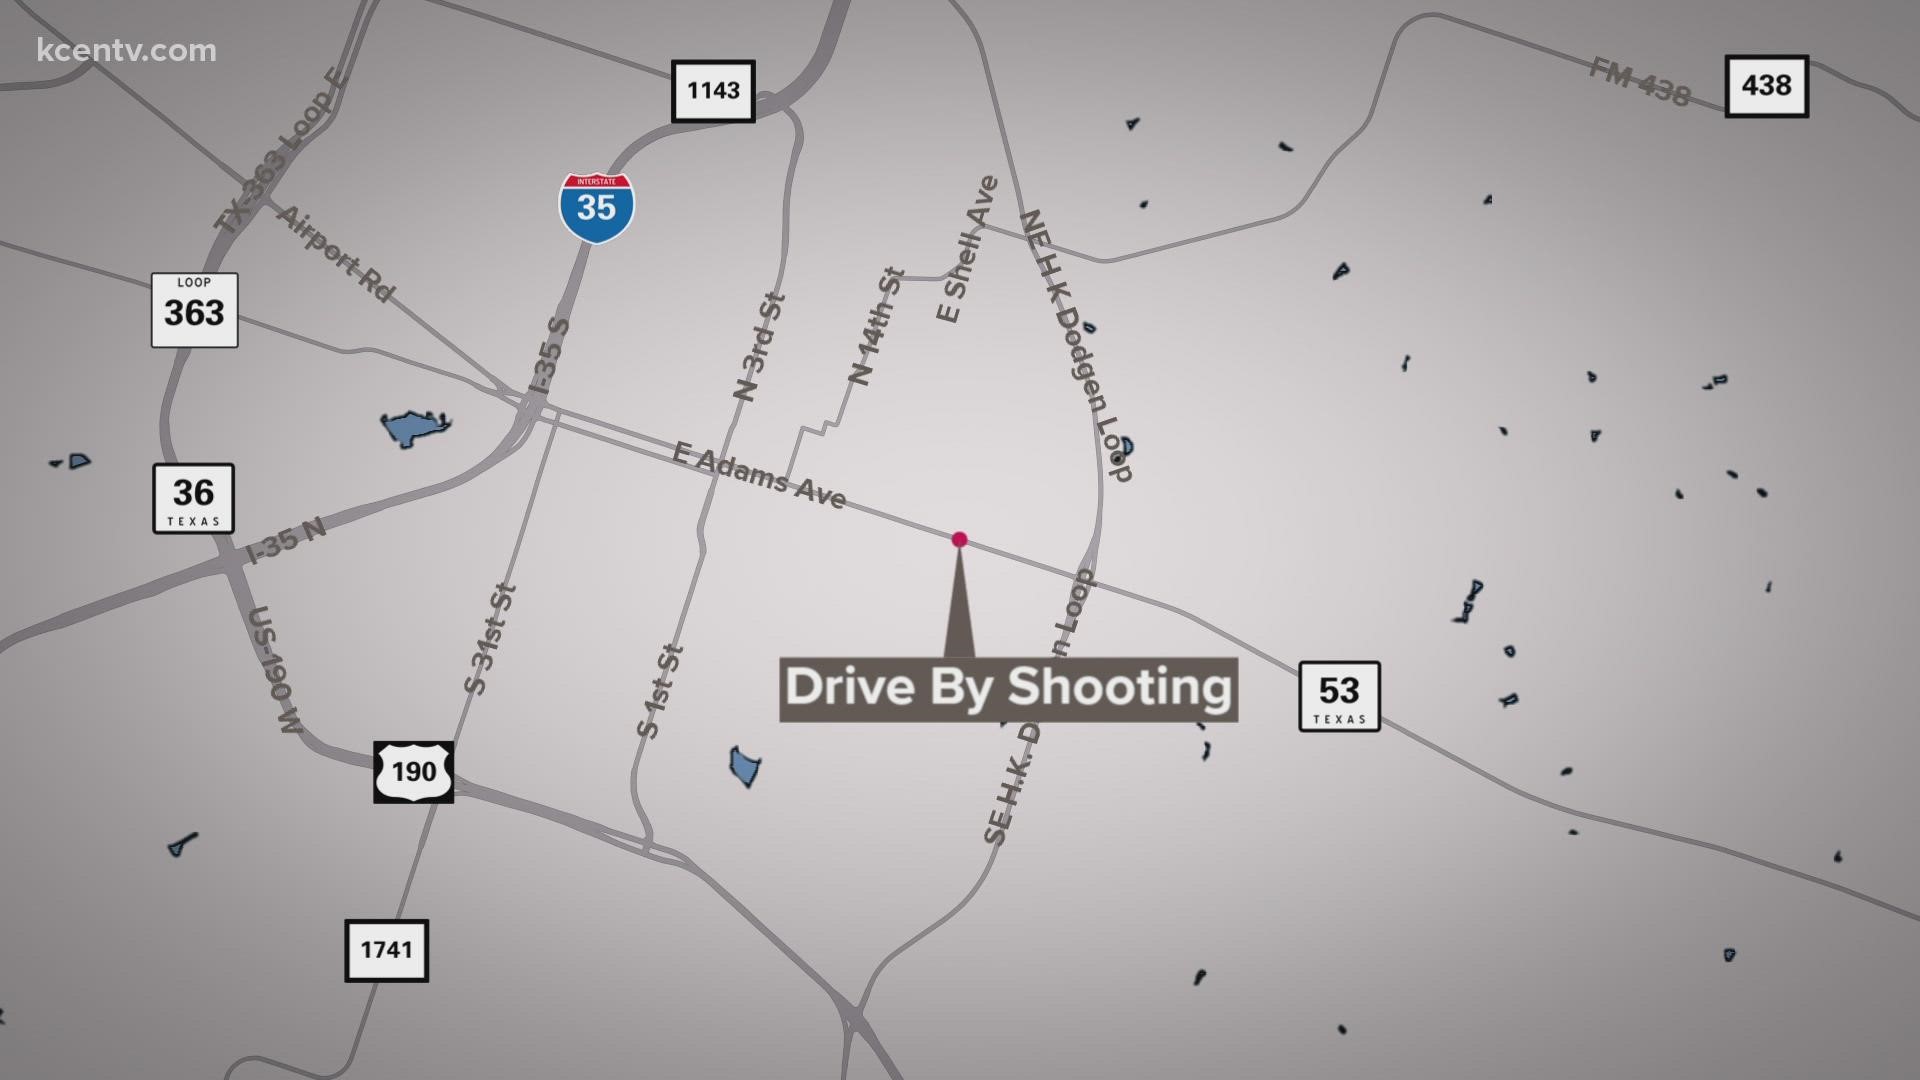 Two people were shot Thursday night in a drive-by shooting, according to the Temple Police Department.